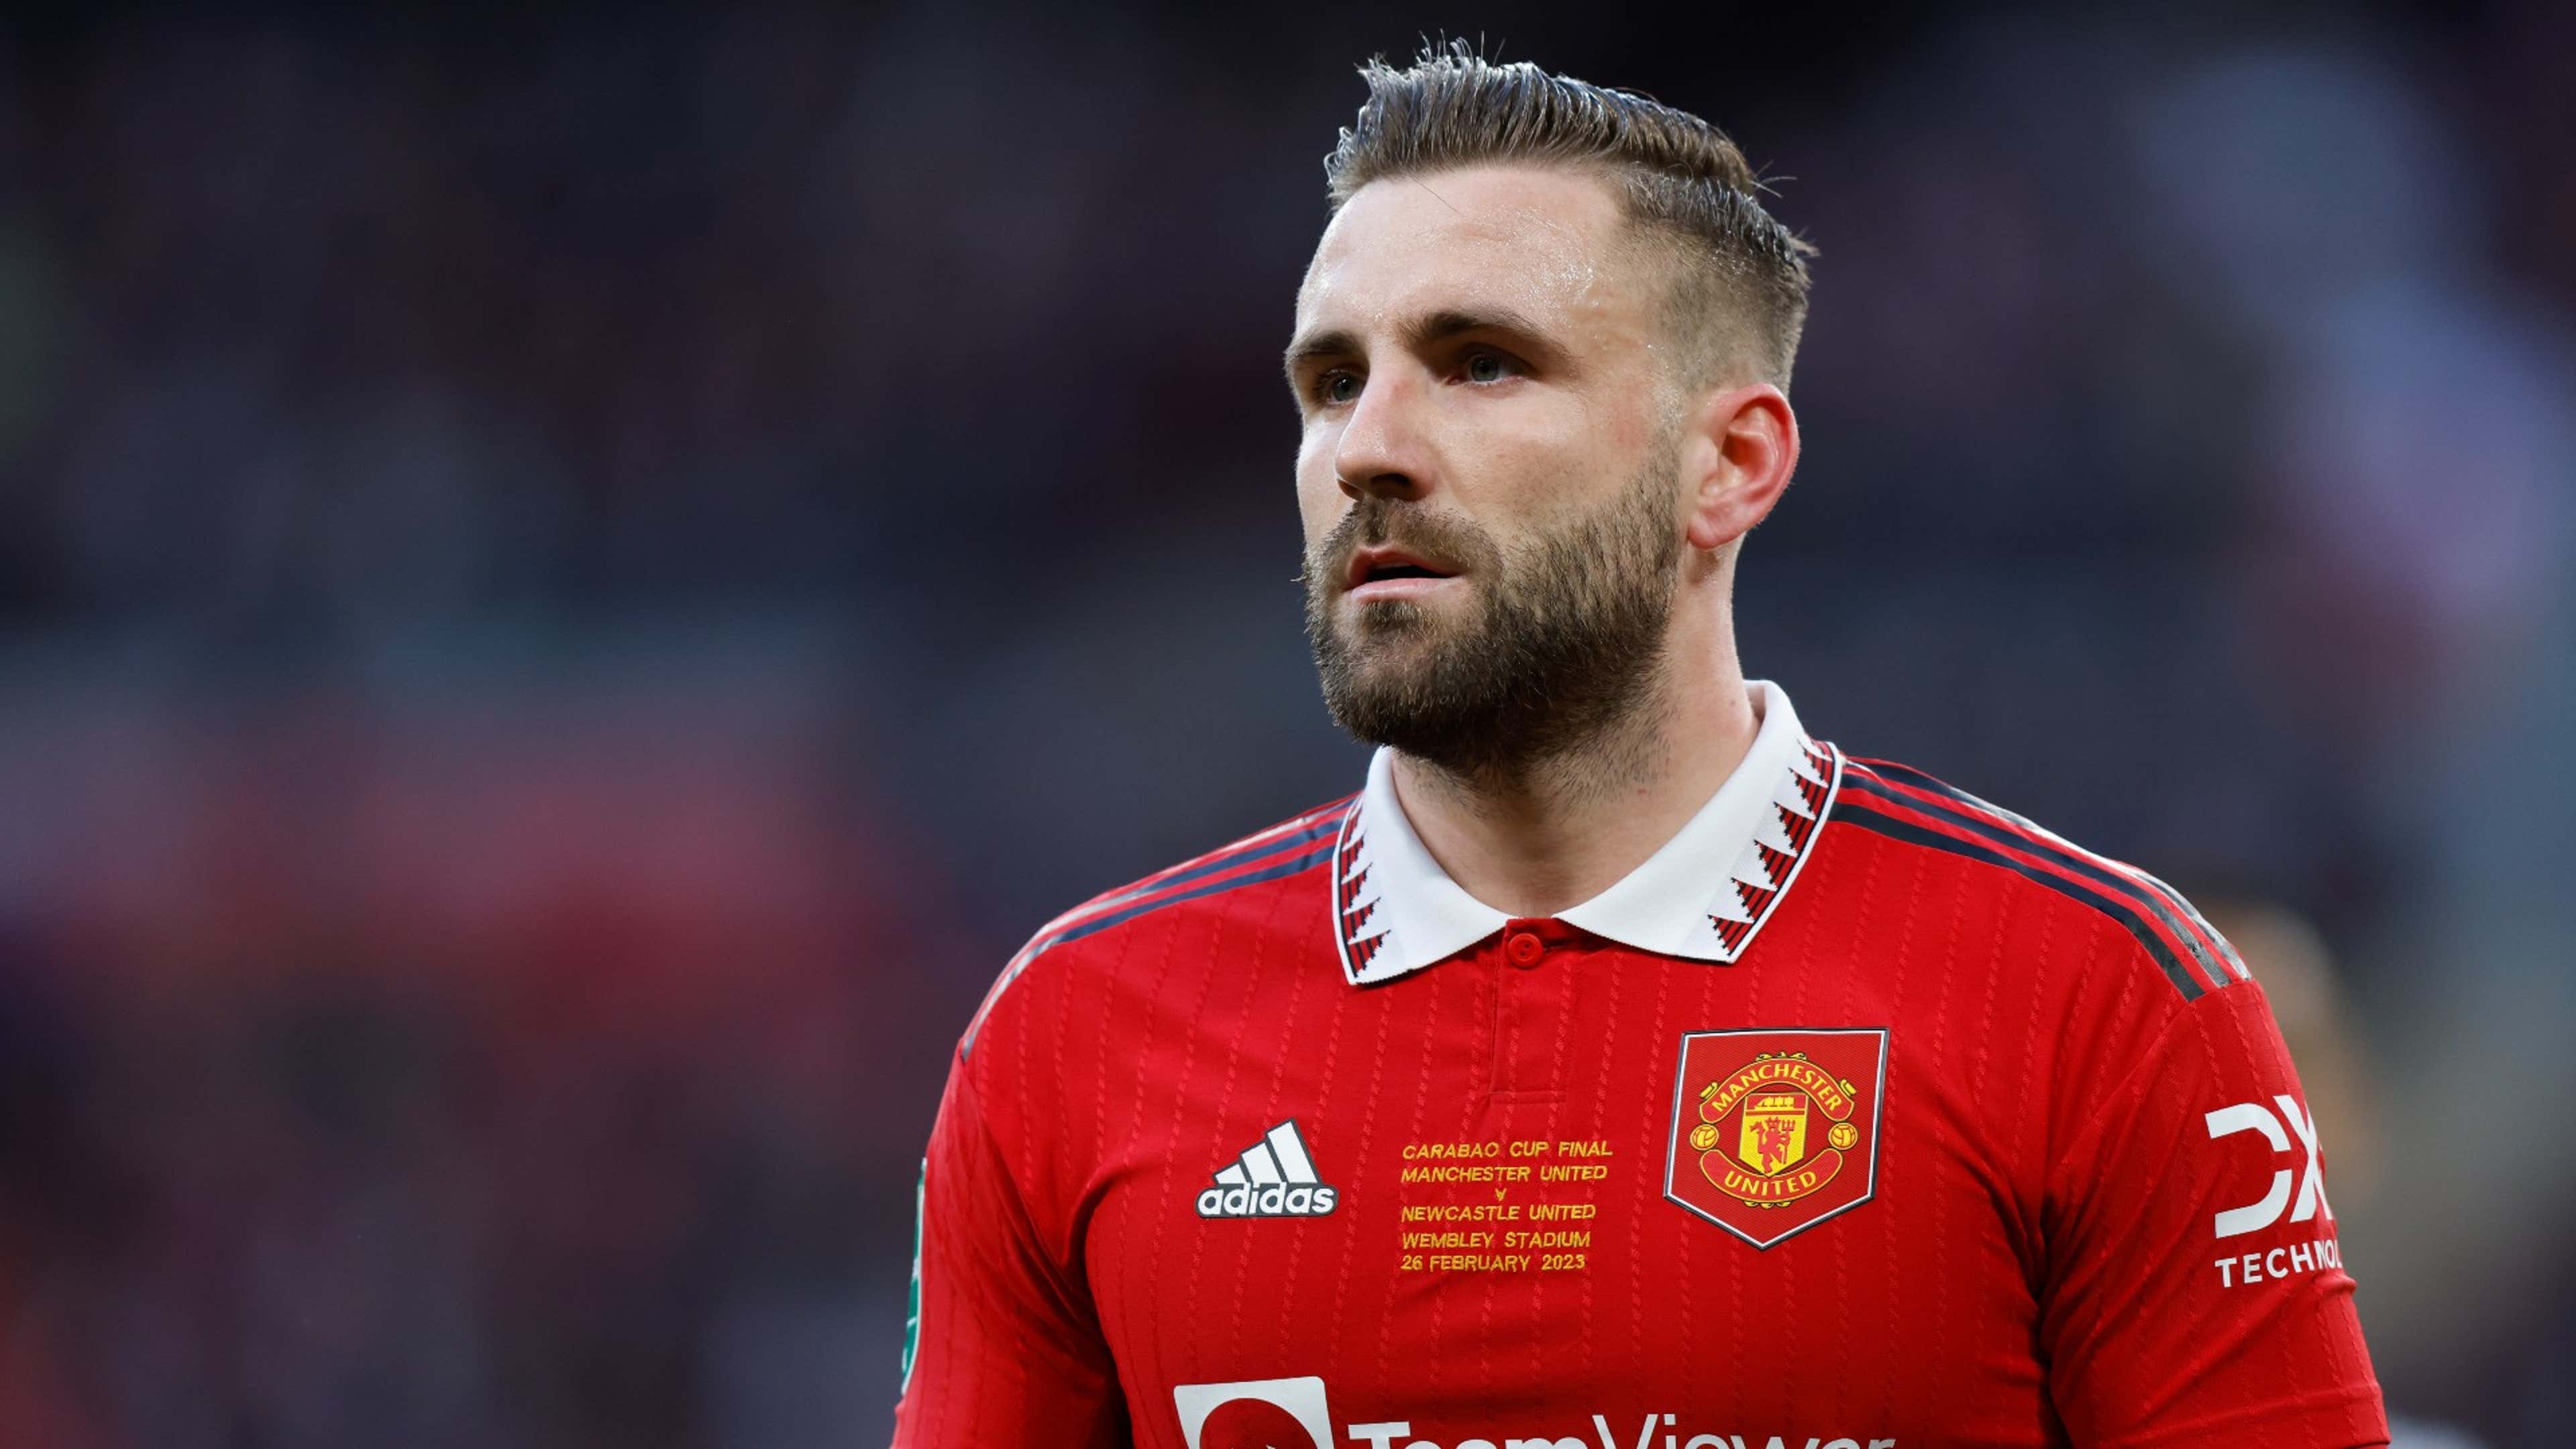 Man Utd out to win every competition next season, says Luke Shaw | Goal.com